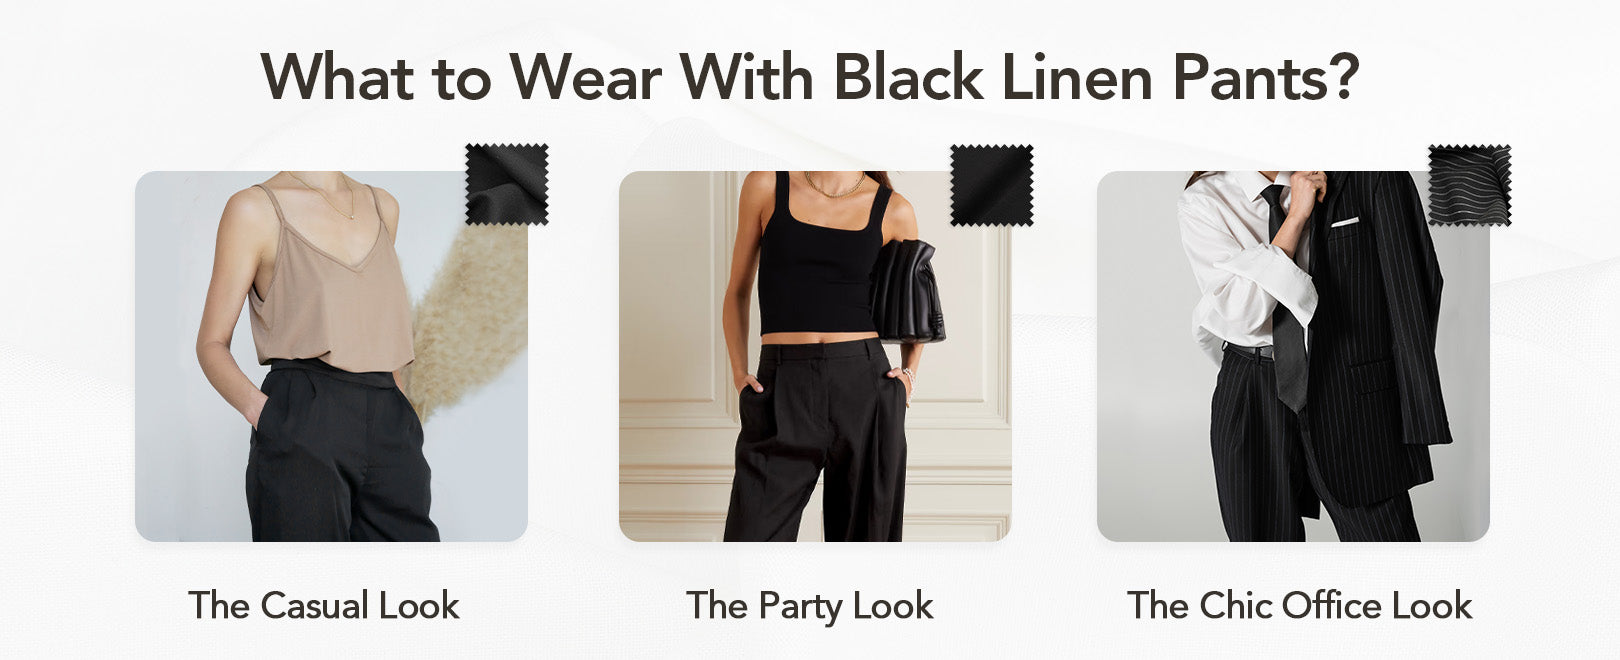 What to Wear With Black Linen Pants : Here is how to style your black linen pants including Elegant, Party, chic office look